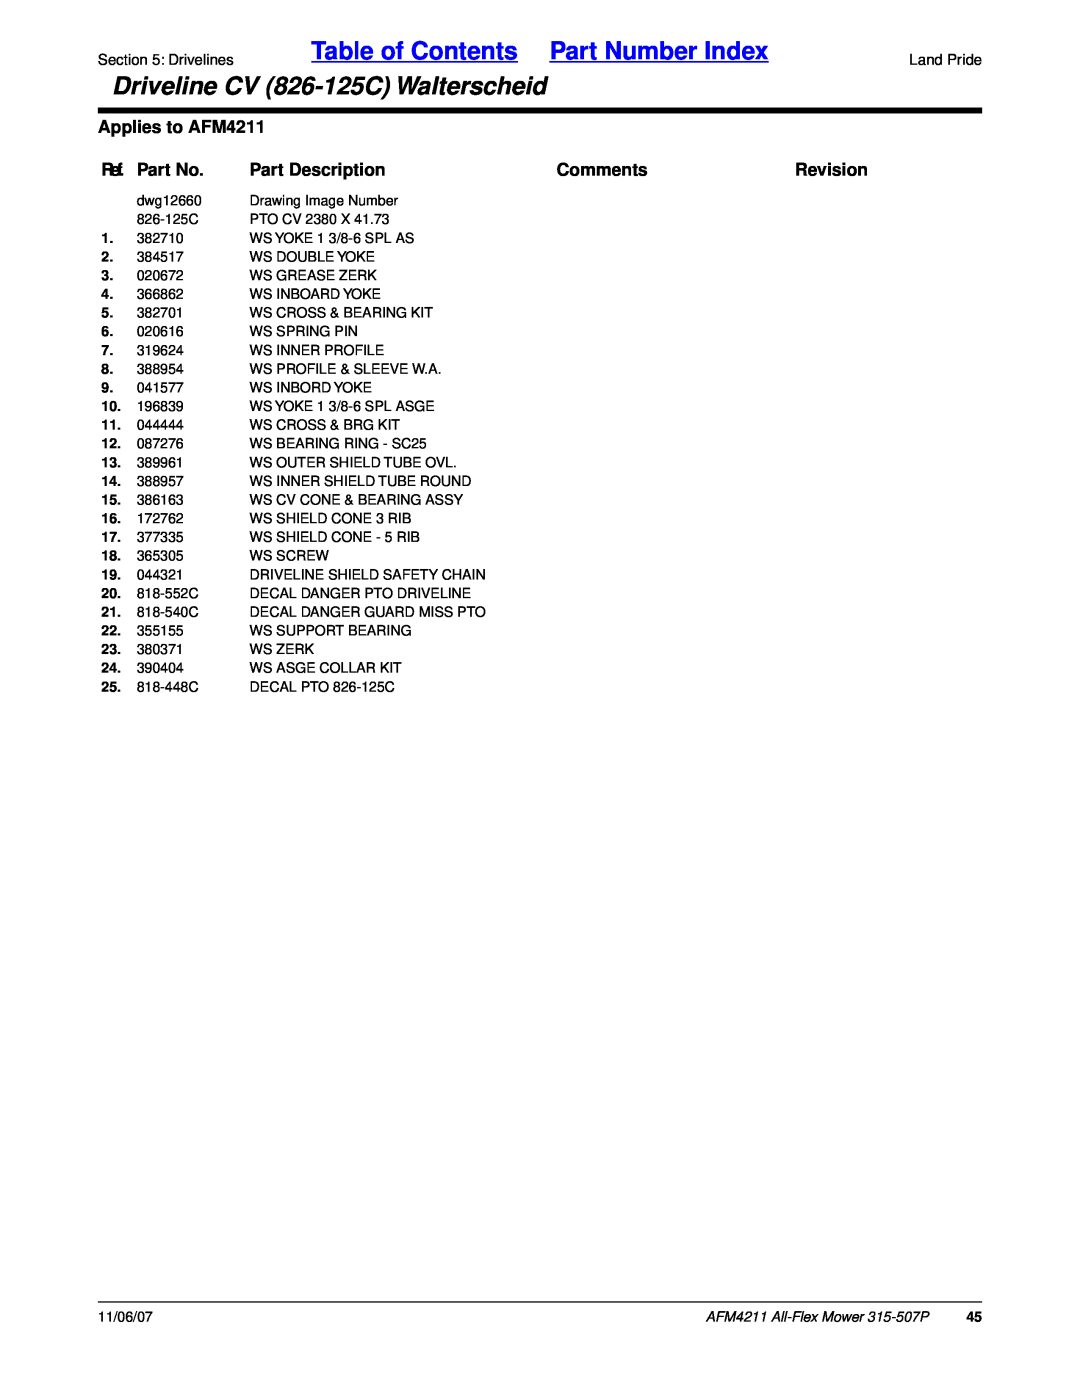 Land Pride All-Flex Mower manual Table of Contents Part Number Index, Driveline CV 826-125CWalterscheid, Applies to AFM4211 